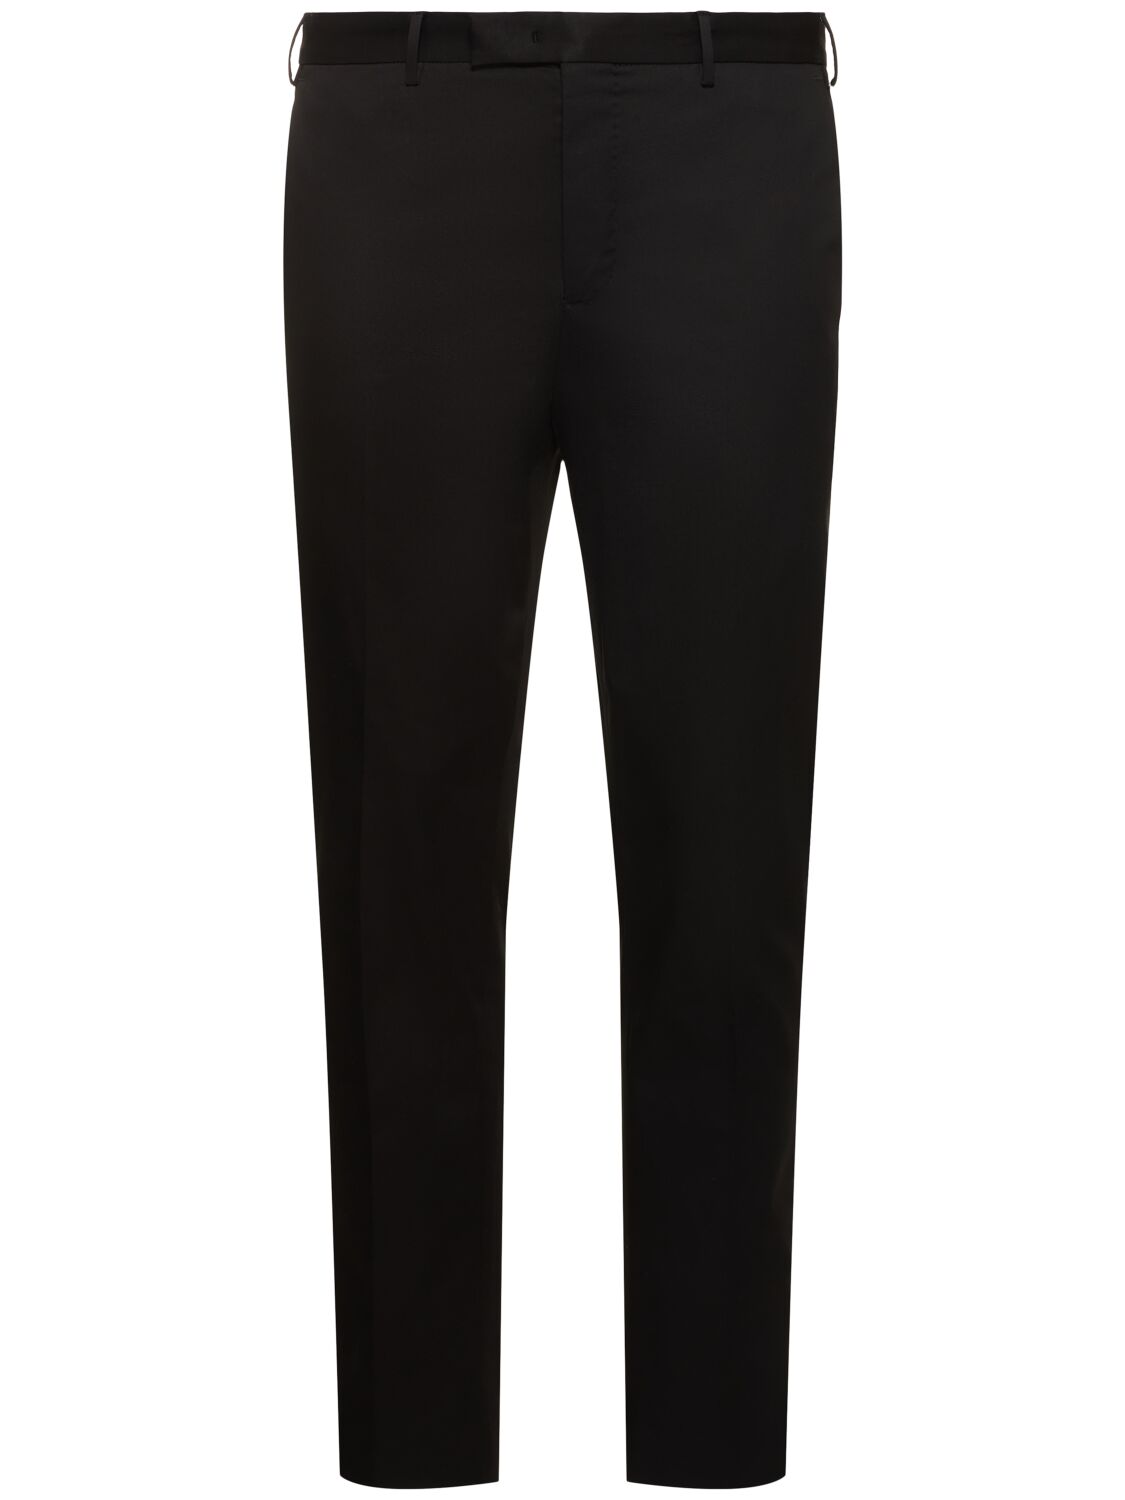 Shop Pt Torino Dieci Pleated Cotton Twill Pants In Black